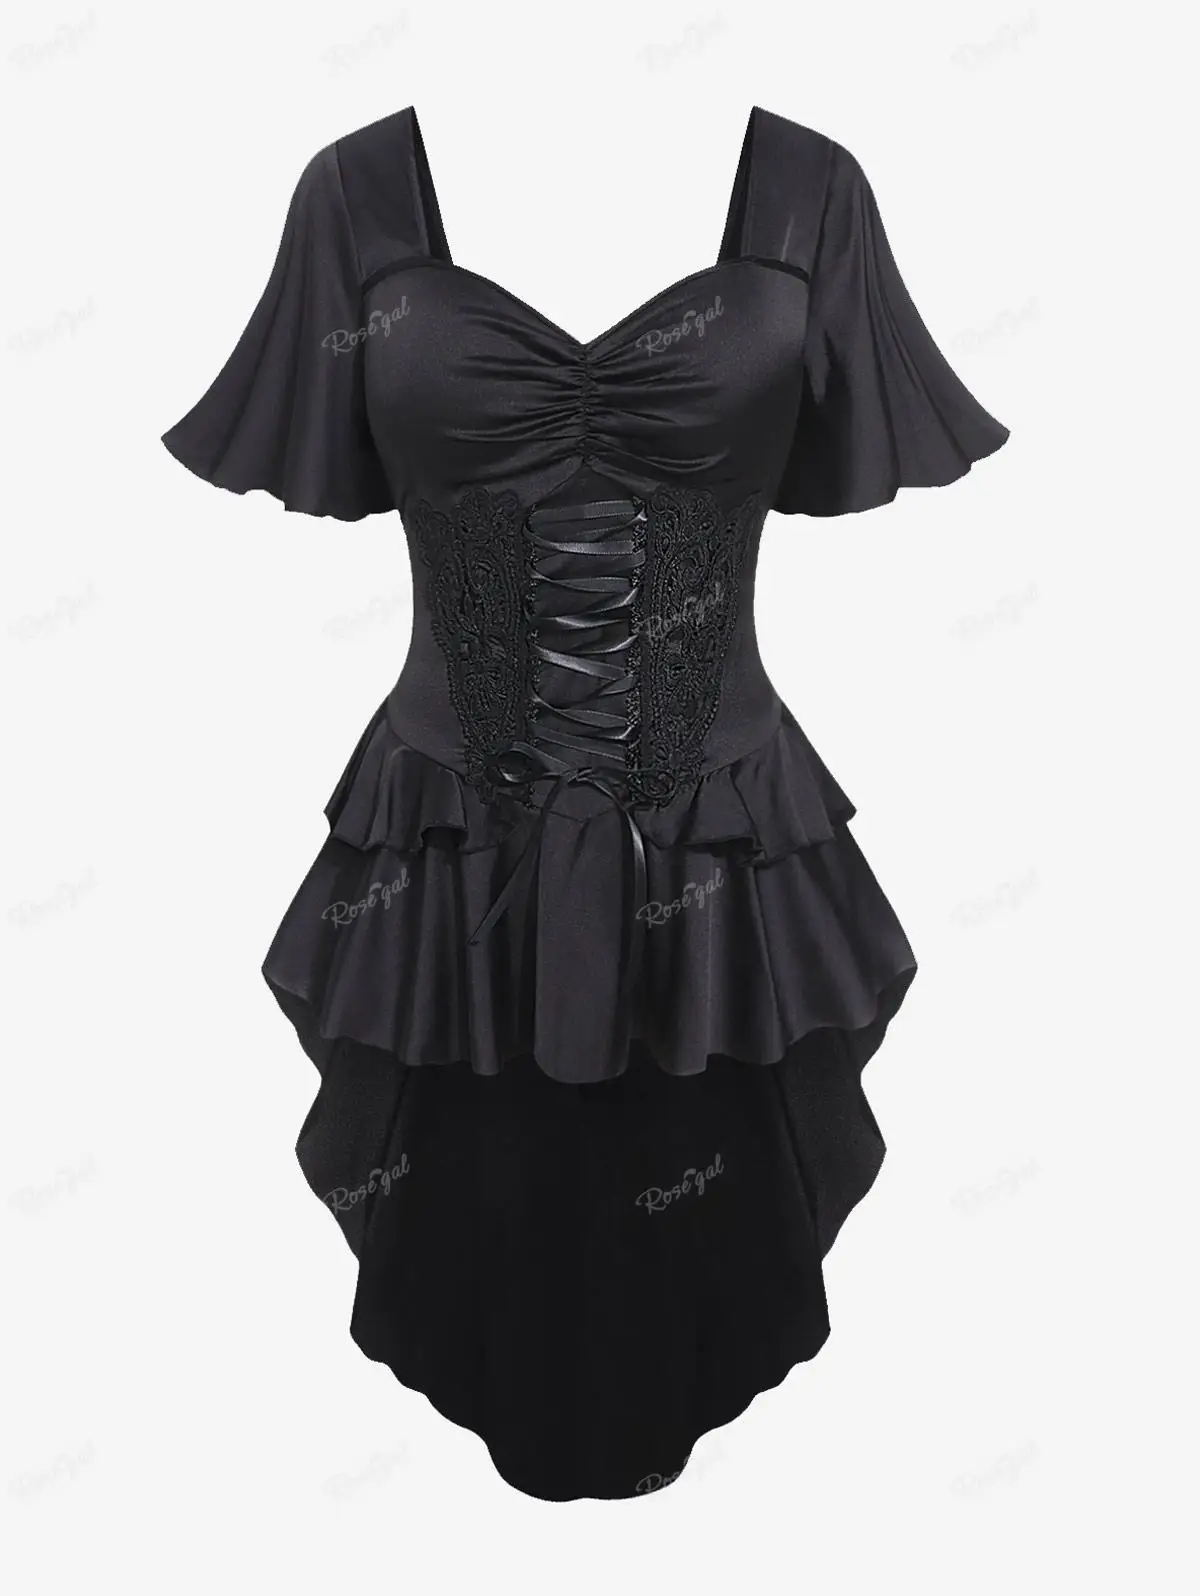 

ROSEGAL Gothic Lace-up Ruffle Silky High Low Blouse New Black Guipure Lace Panel Top Women Streetwear Flutter Sleeve T-Shirt 4XL